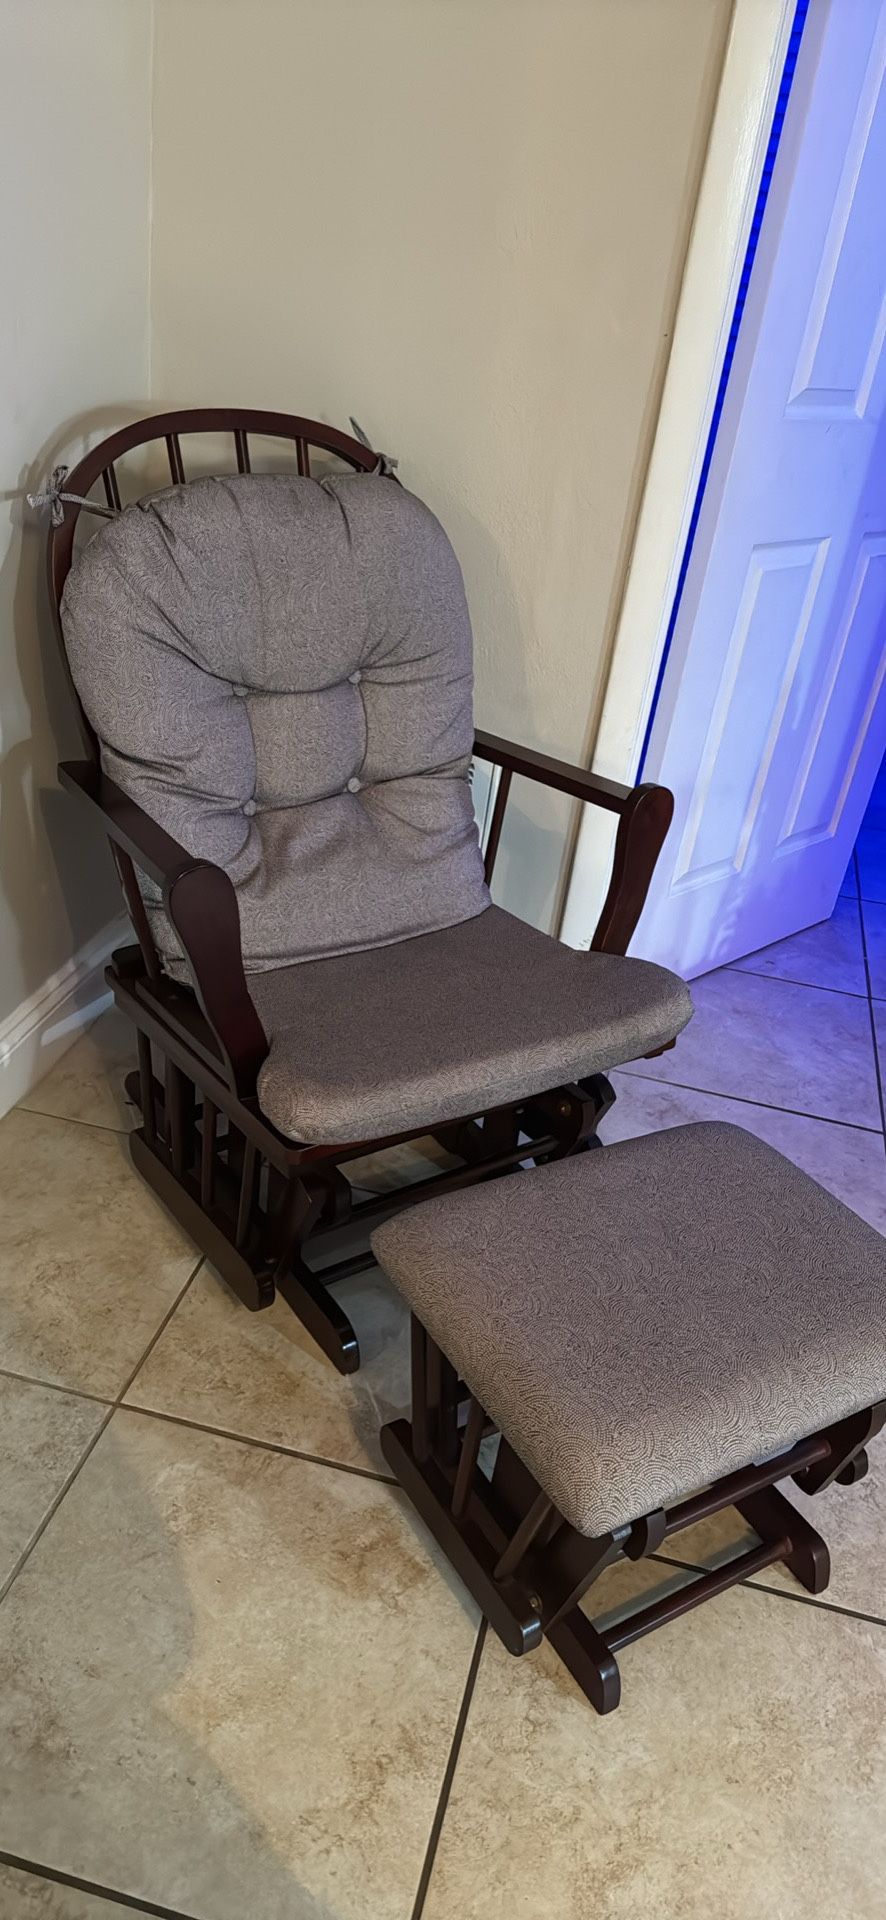 Brand New Barely Used Rocking Chair Brow and Grey